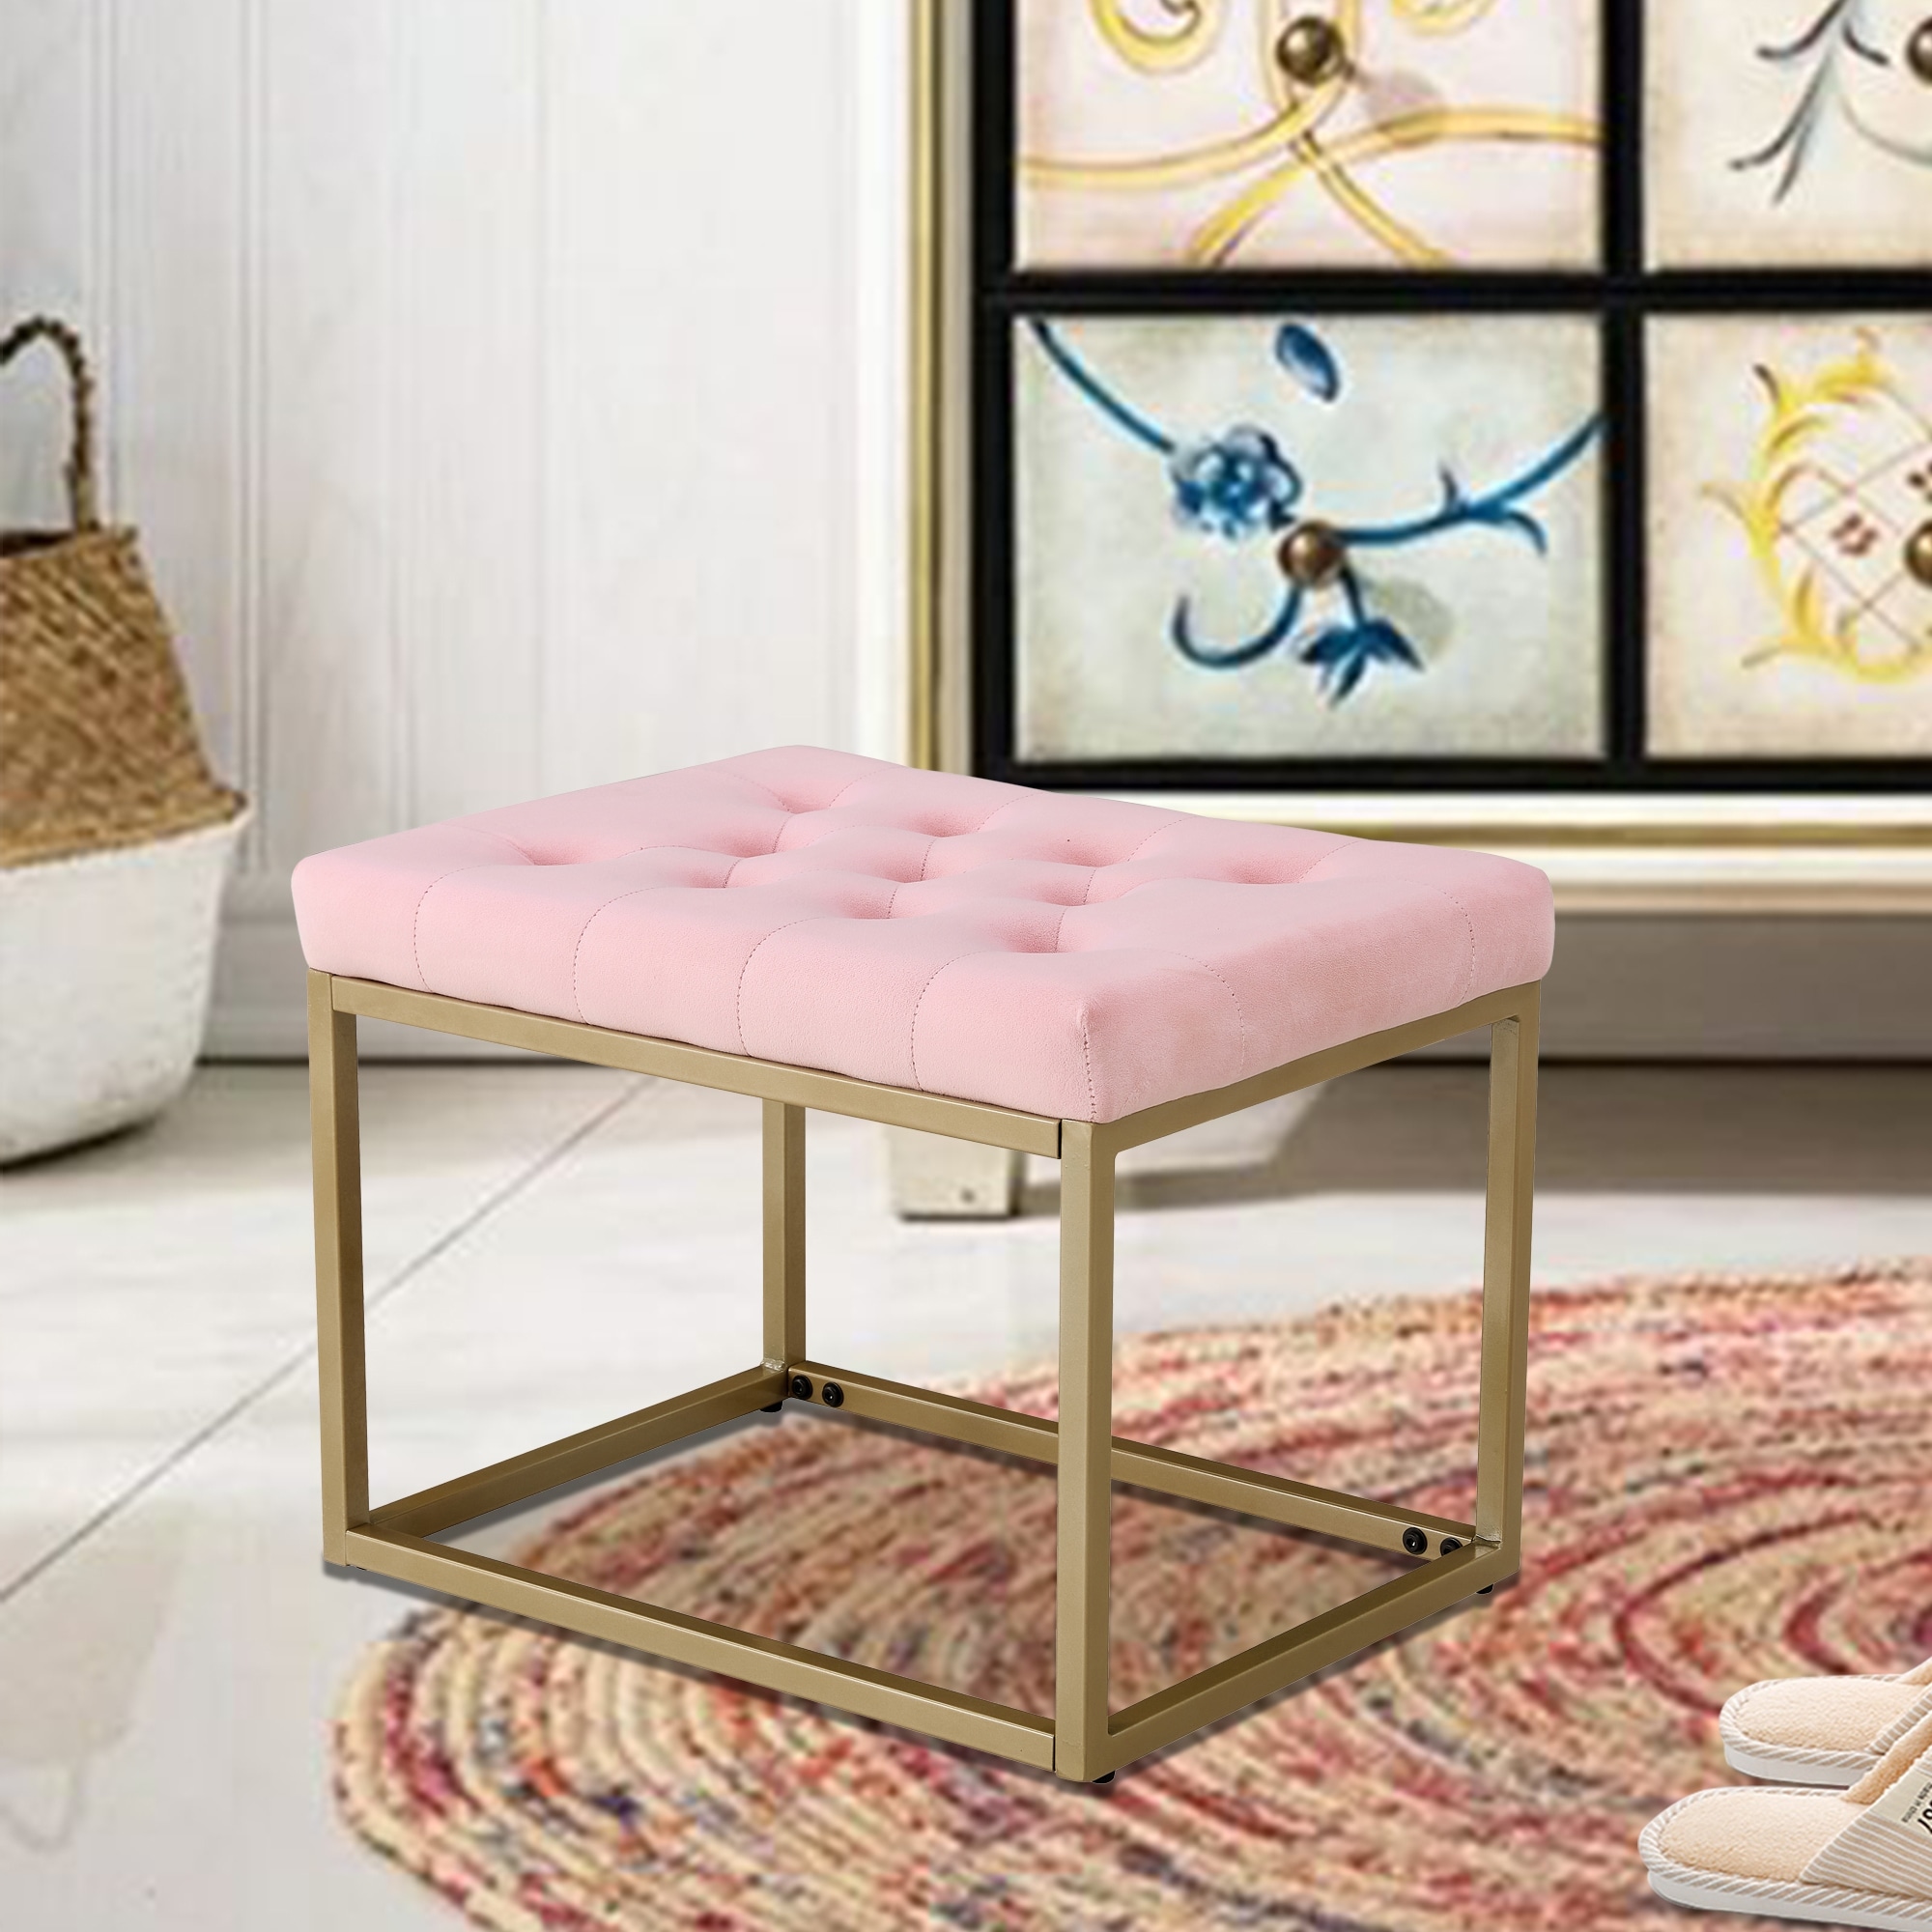 https://ak1.ostkcdn.com/images/products/is/images/direct/3eff3dc8ae39e33de3cd027c67cf33484ac75c4a/Square-Vanity-Chair-Sofa-Stool-Makup-Stool-Vanity-Seat-Rest-Stool-Velvet-Shoe-Changing-Footstool-for-Clothes-Shop-Porch.jpg